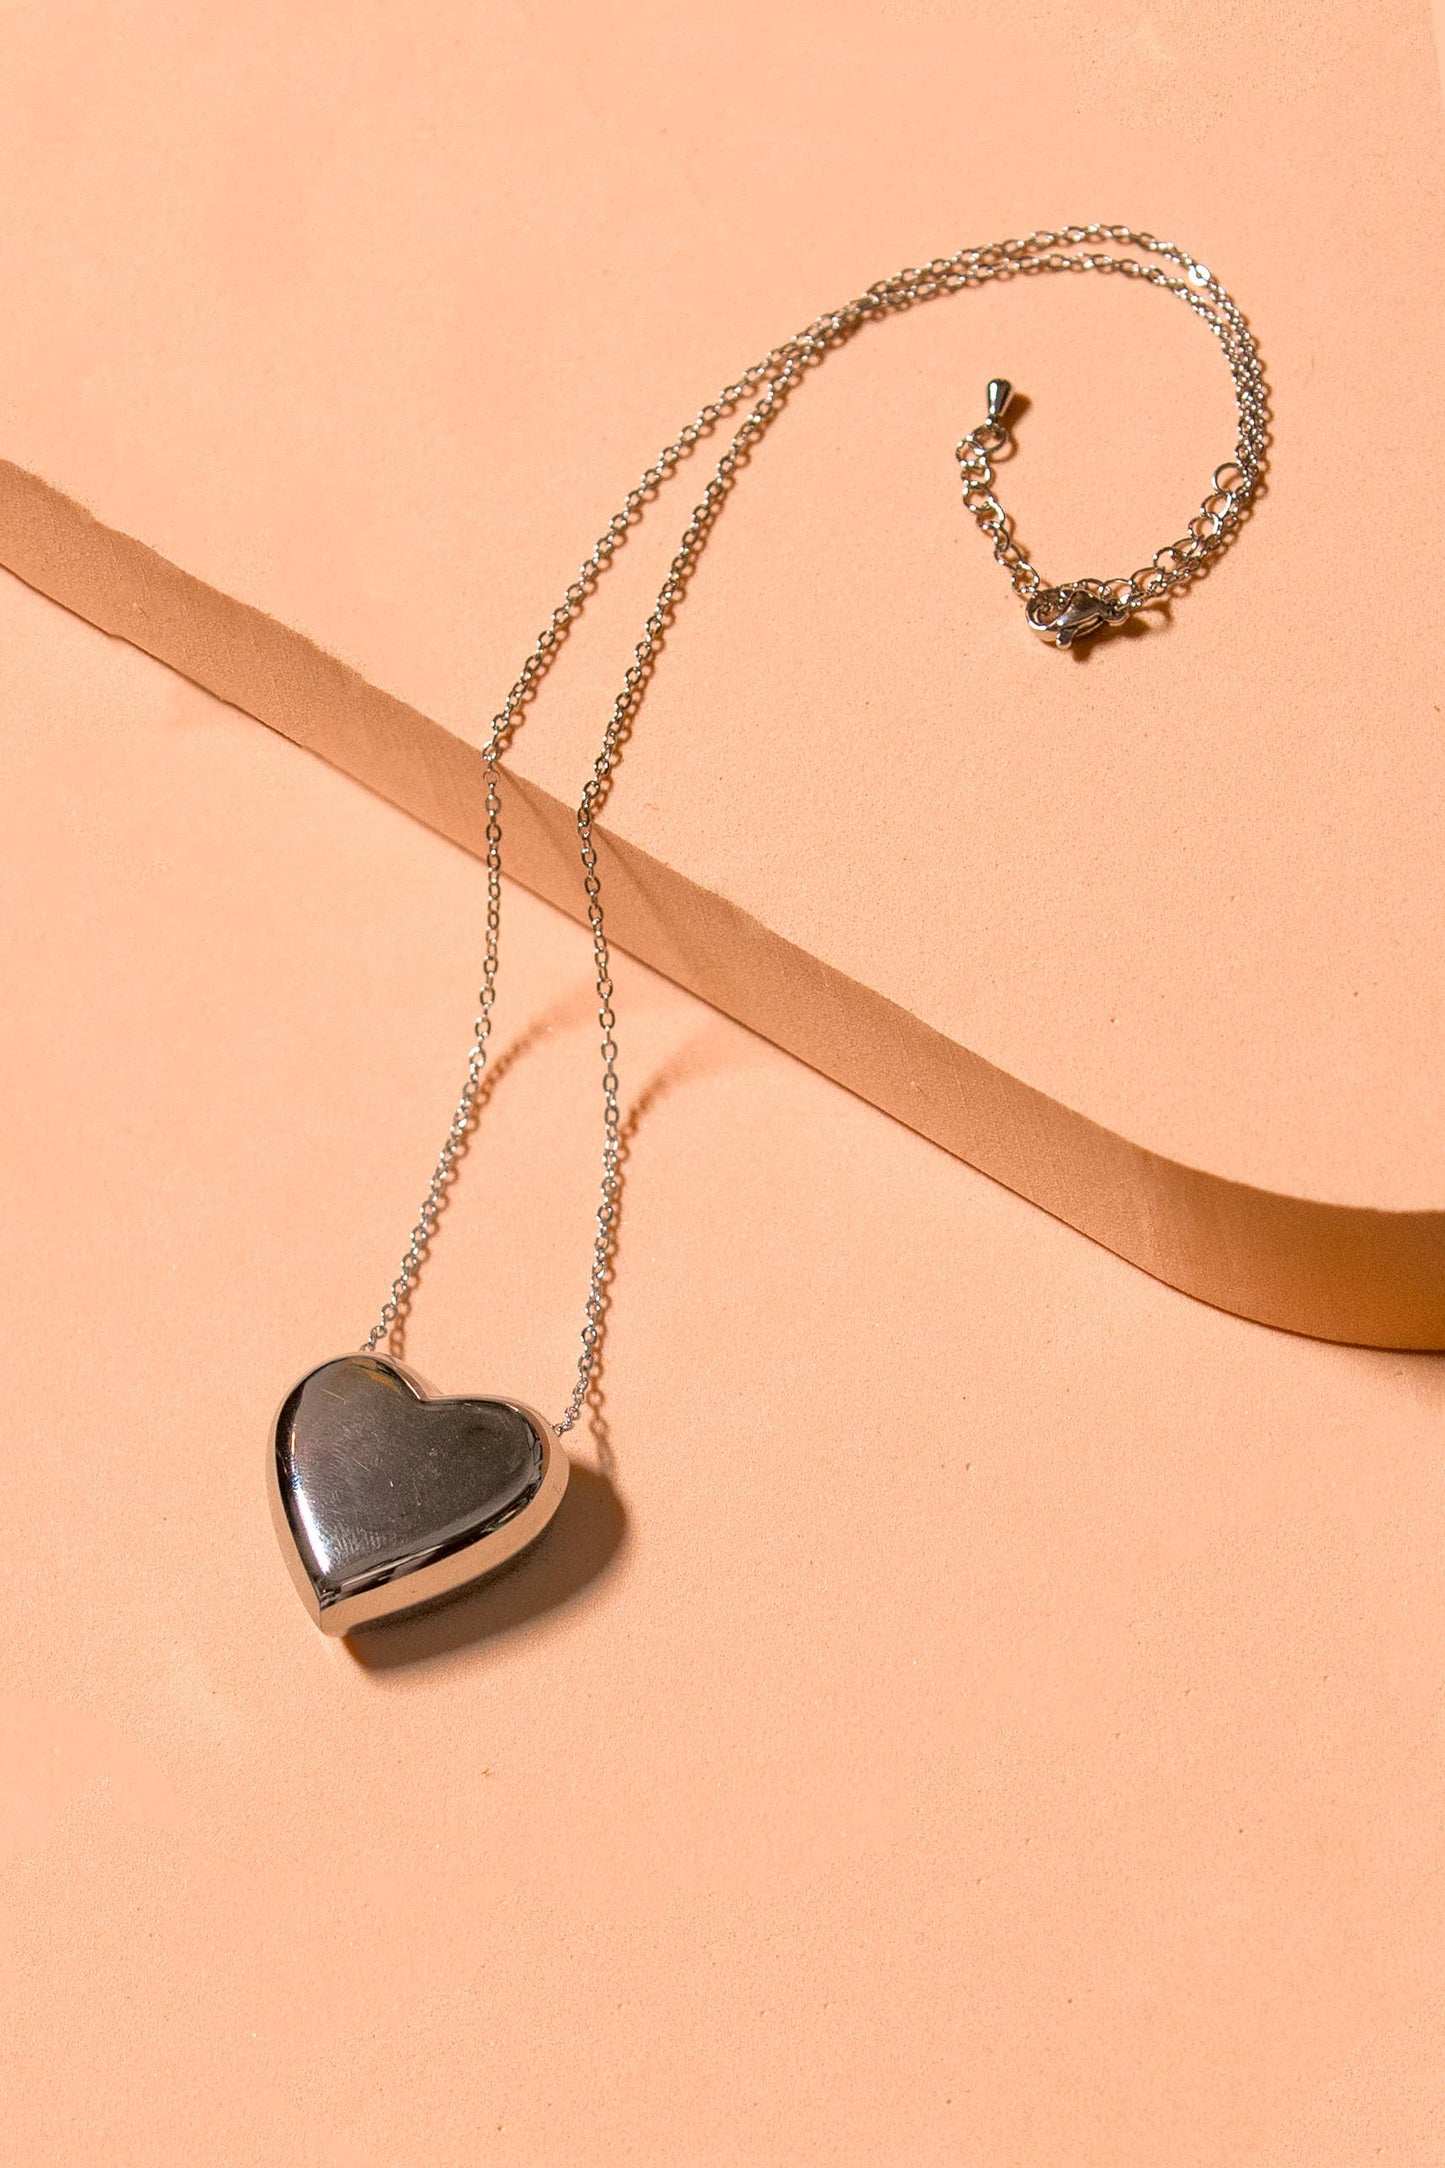 Can't Heartly Wait Necklace